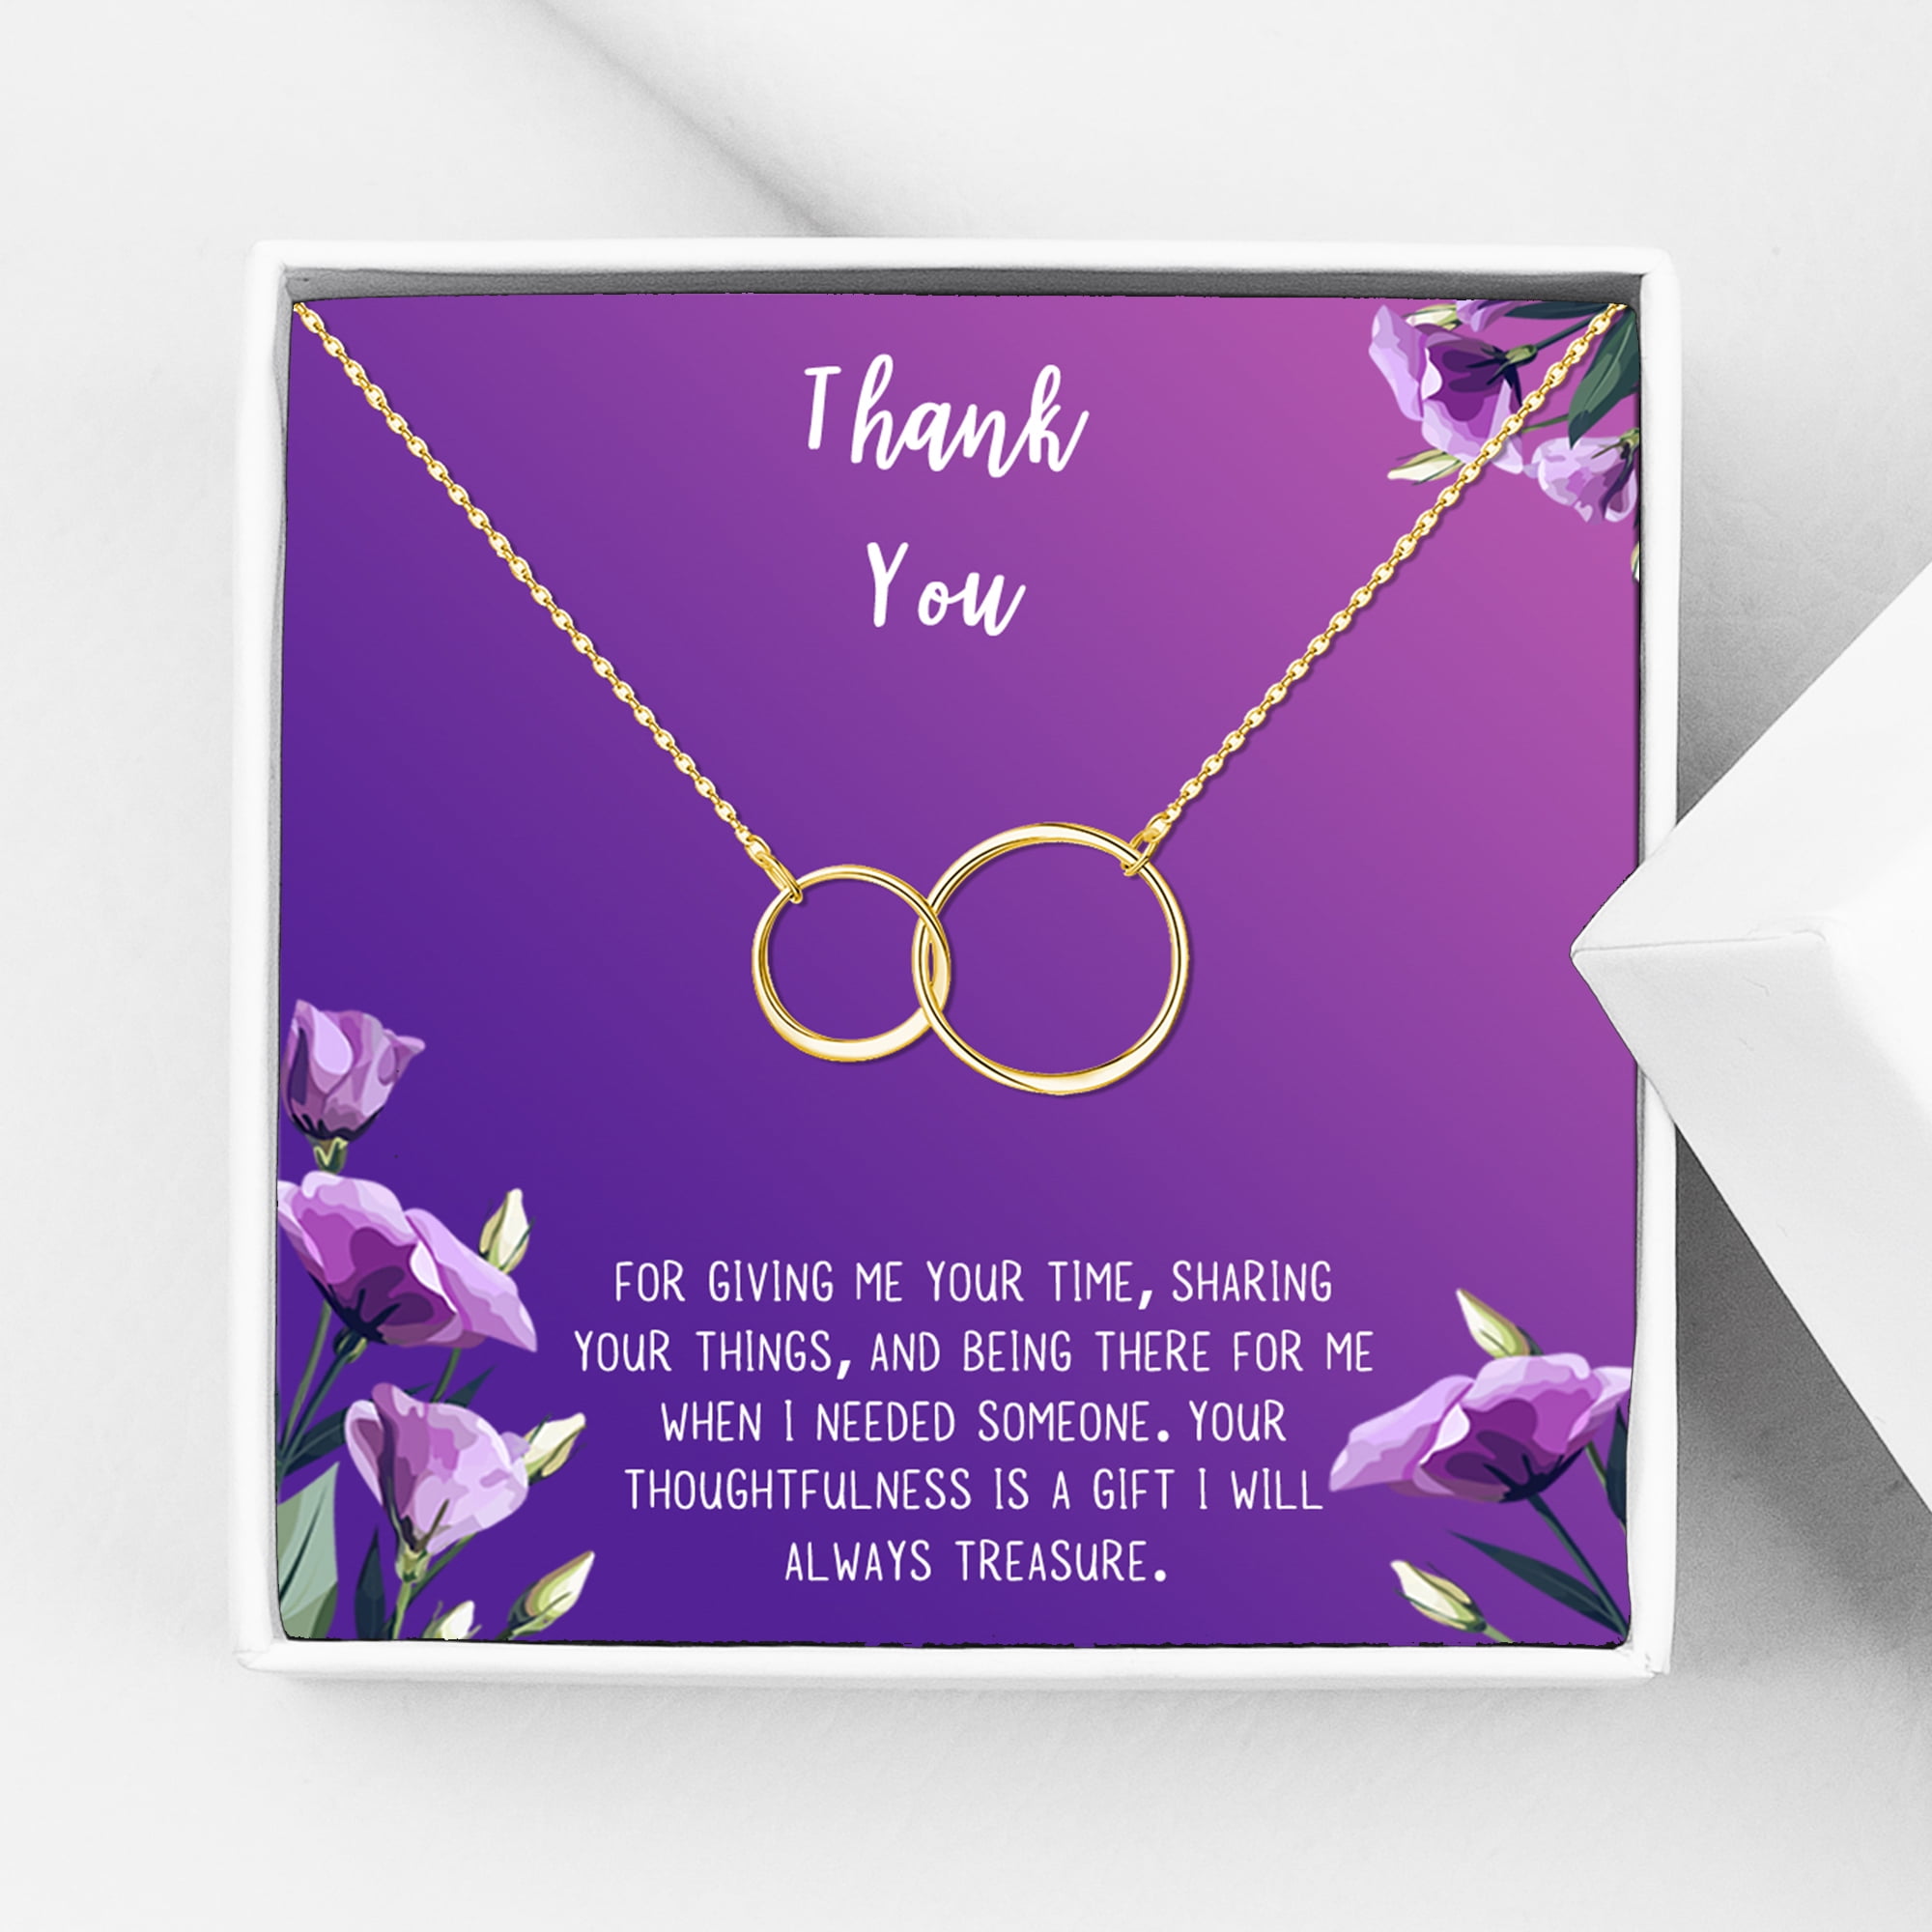 Thank You Card Jewelry Gift Set, Appreciation Gift for Her, Thank You Gift for Friends, Christmas Jewery Gift for Her, Necklace and Card Gift Set